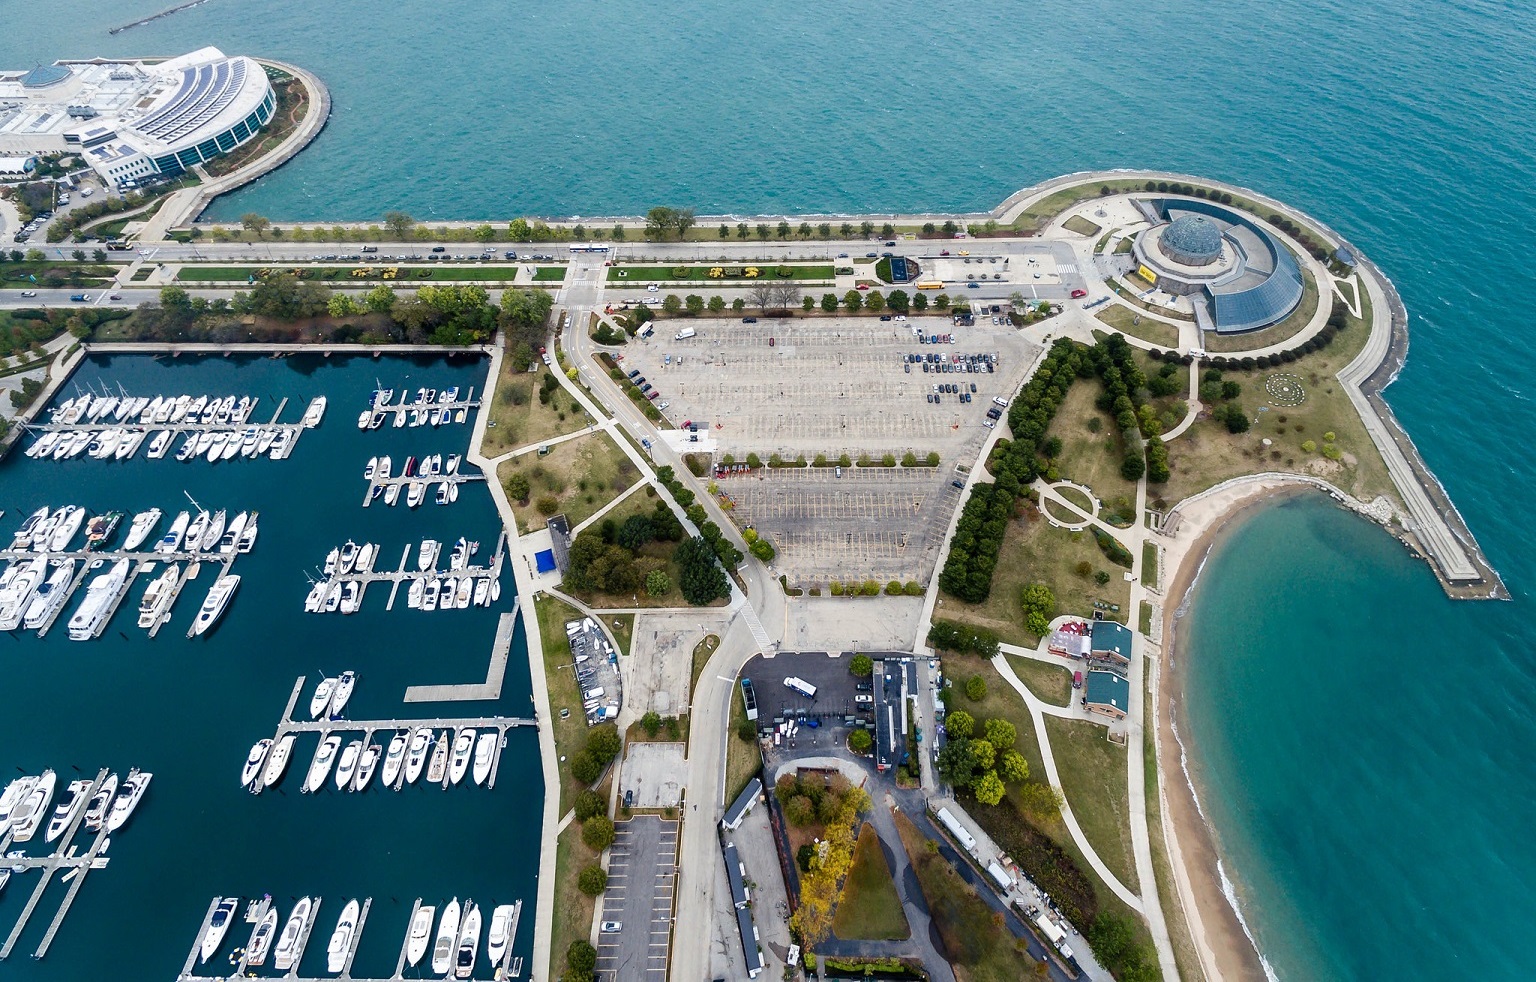 Conflicted: Chicago’s plans for a lakefront “urban oasis” didn’t include a concert venue or